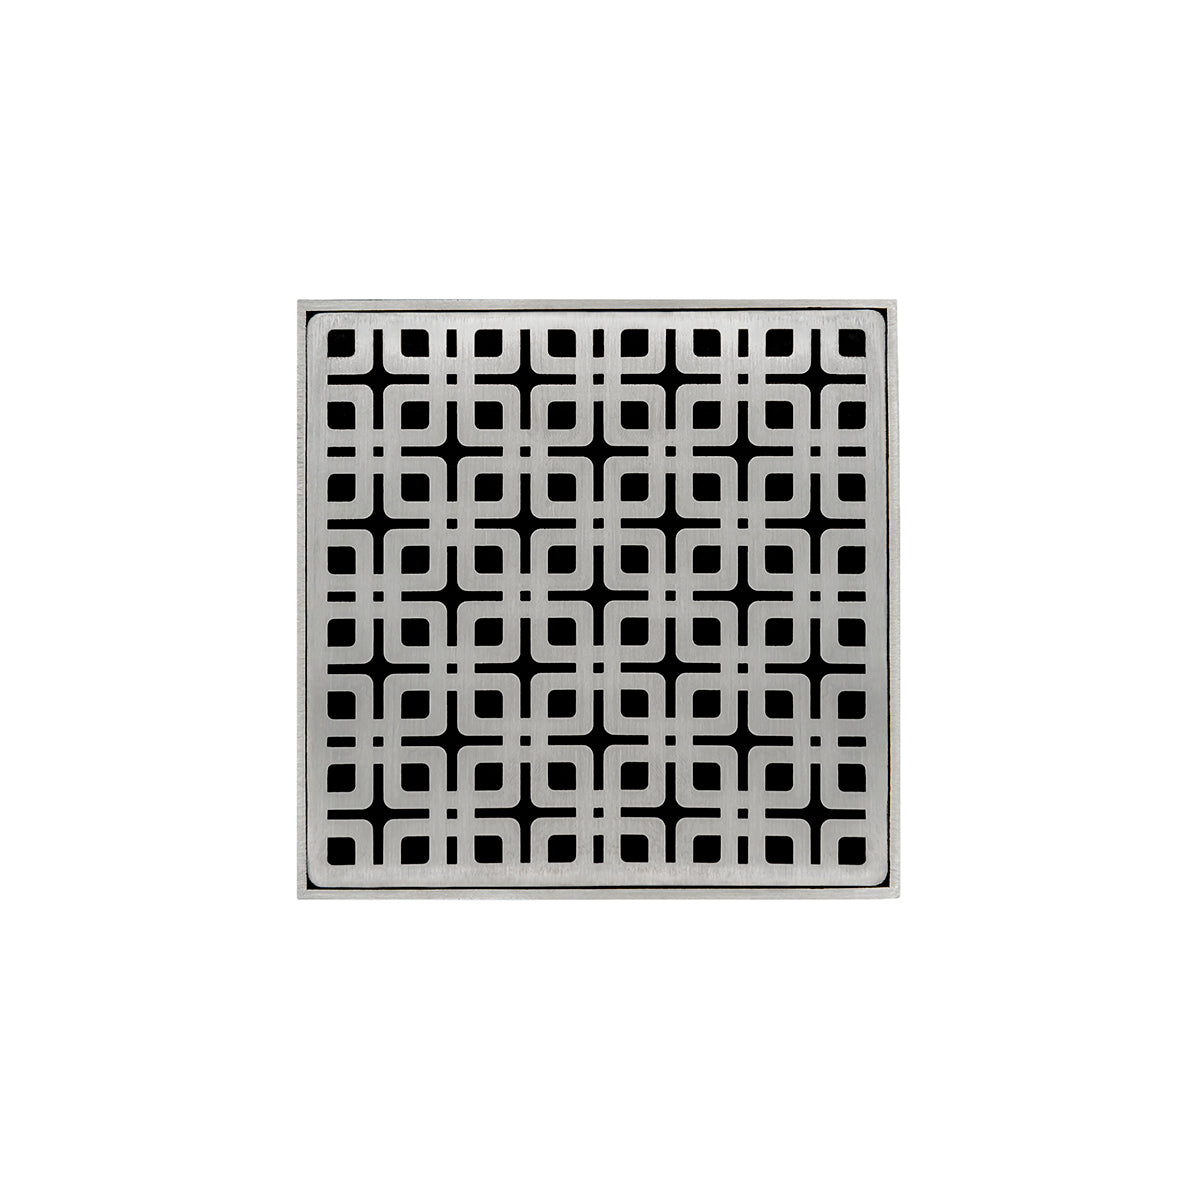 Infinity Drain 5" x 5" KDB 5 Premium Center Drain Kit with Link Pattern Decorative Plate with PVC Bonded Flange Drain Body, 2", 3" and 4" Outlet